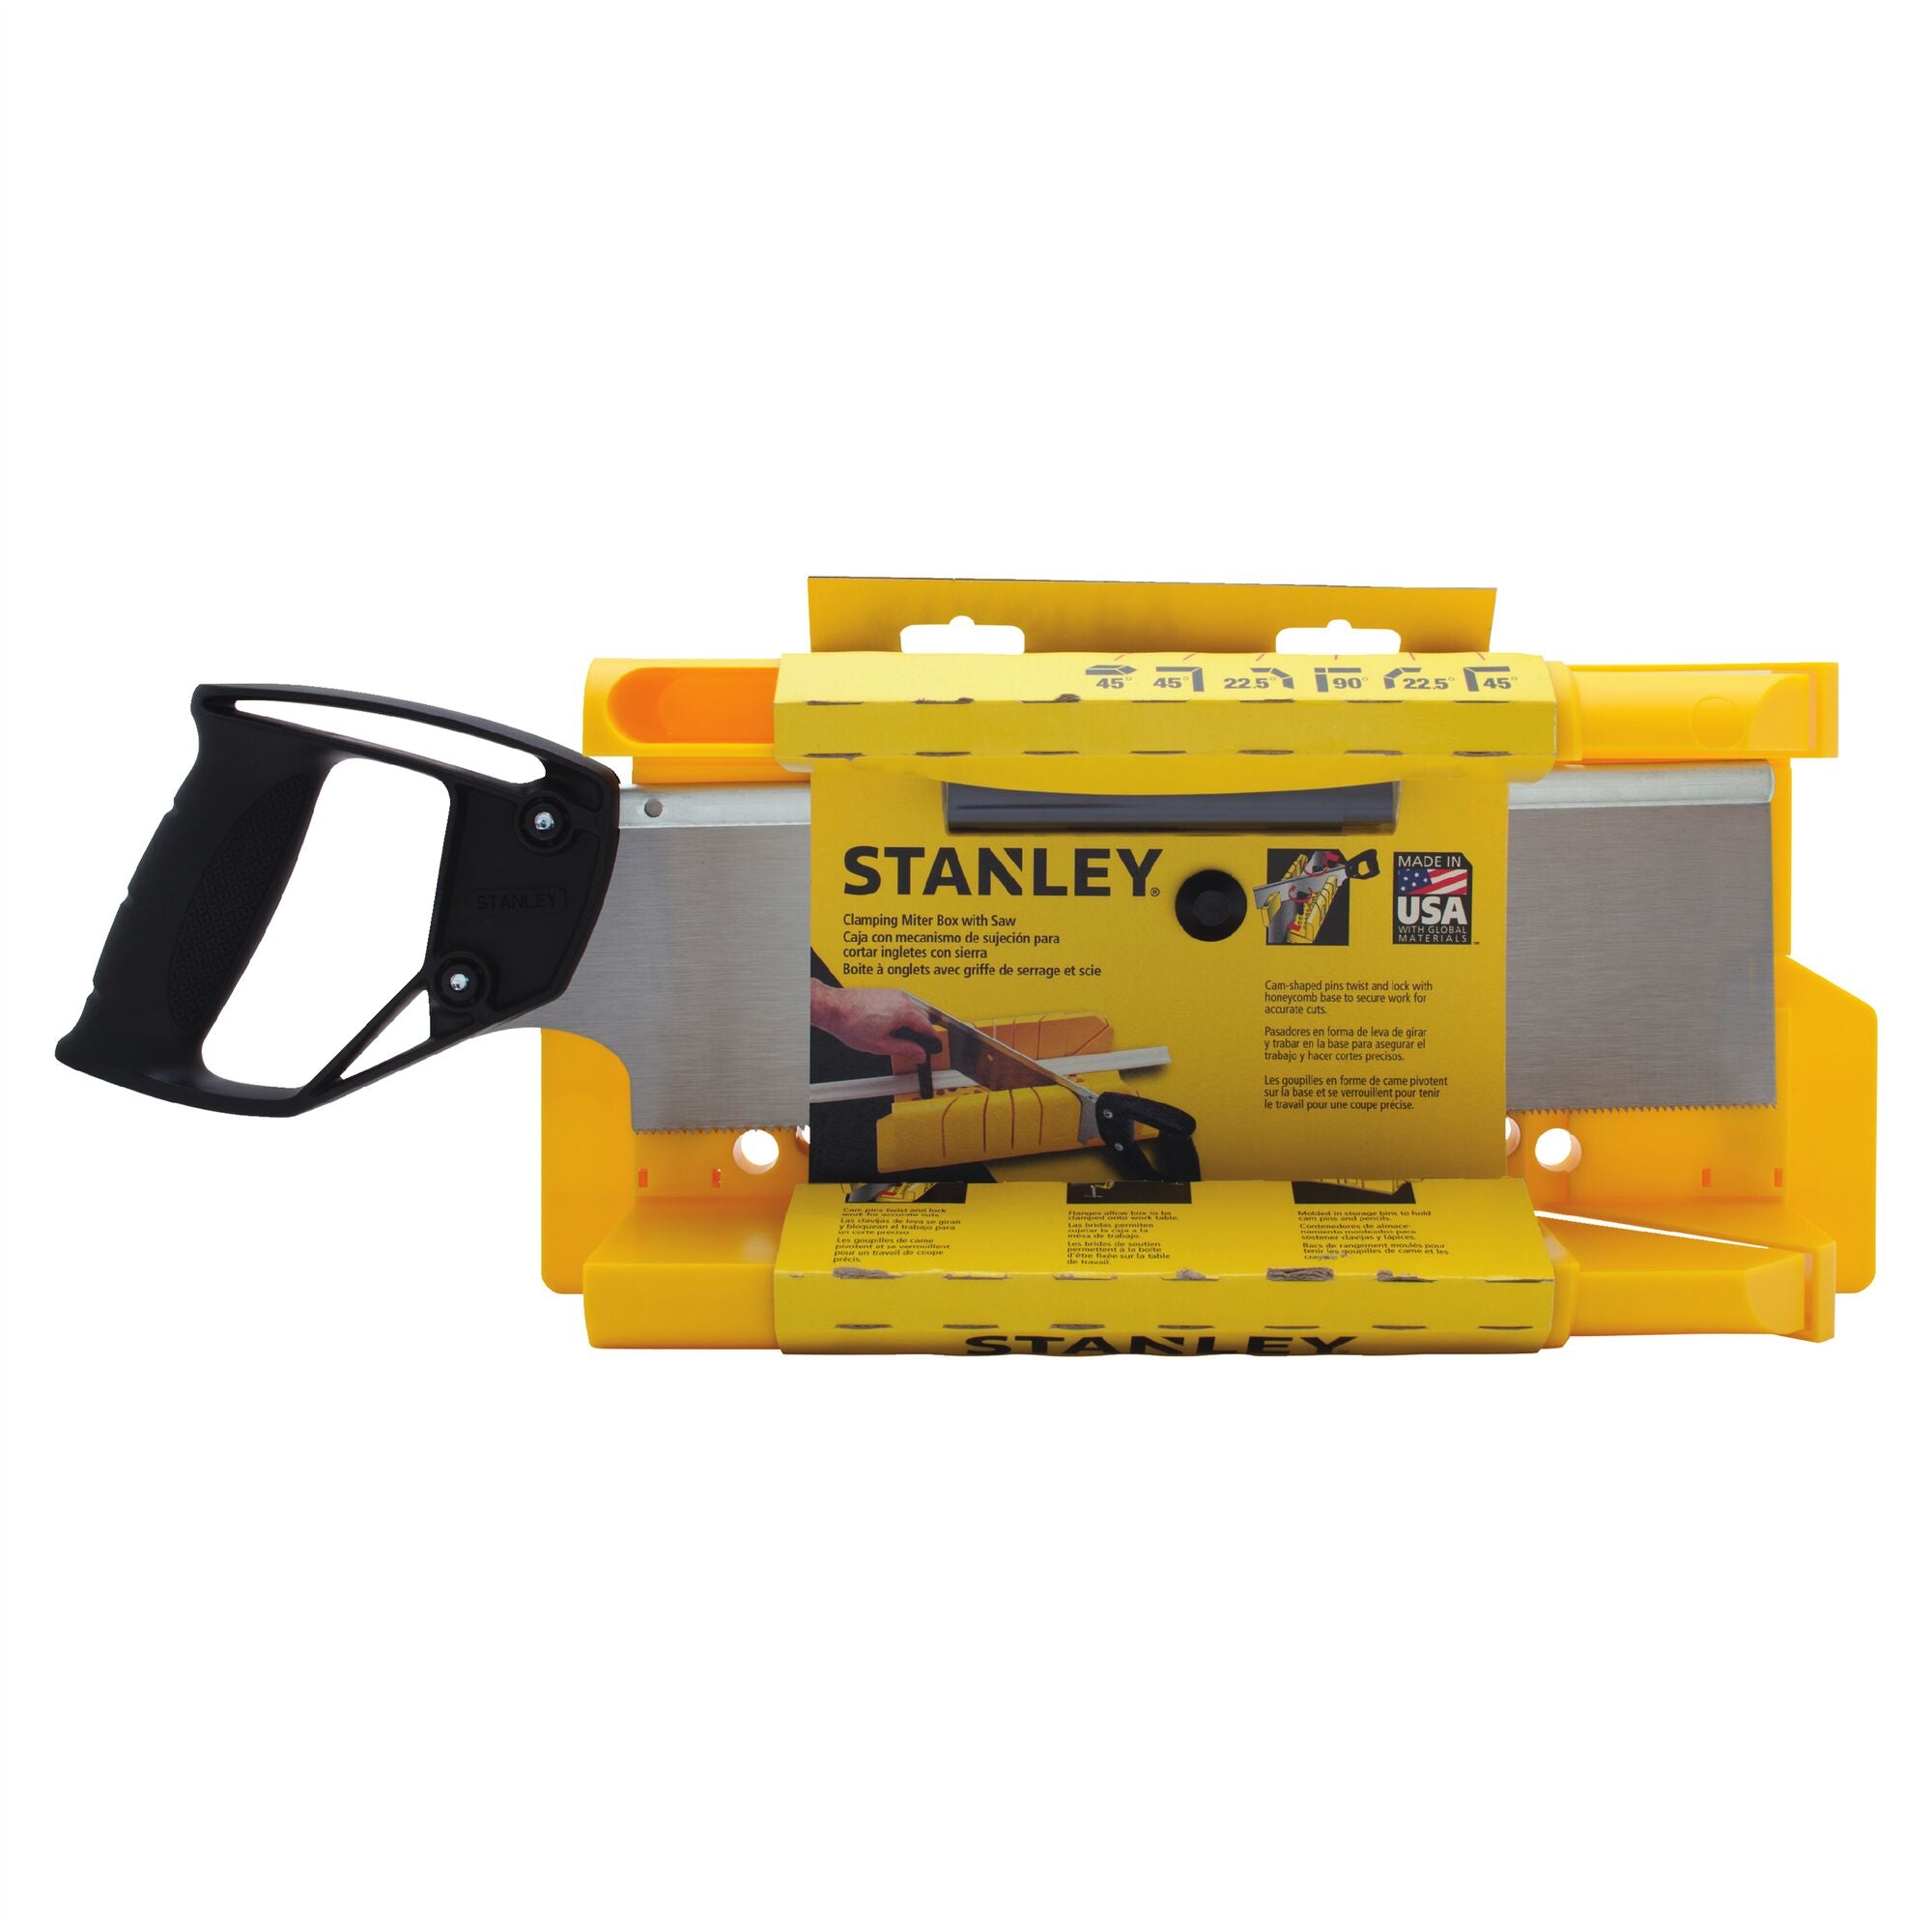 Clamping Mitre Box With Saw